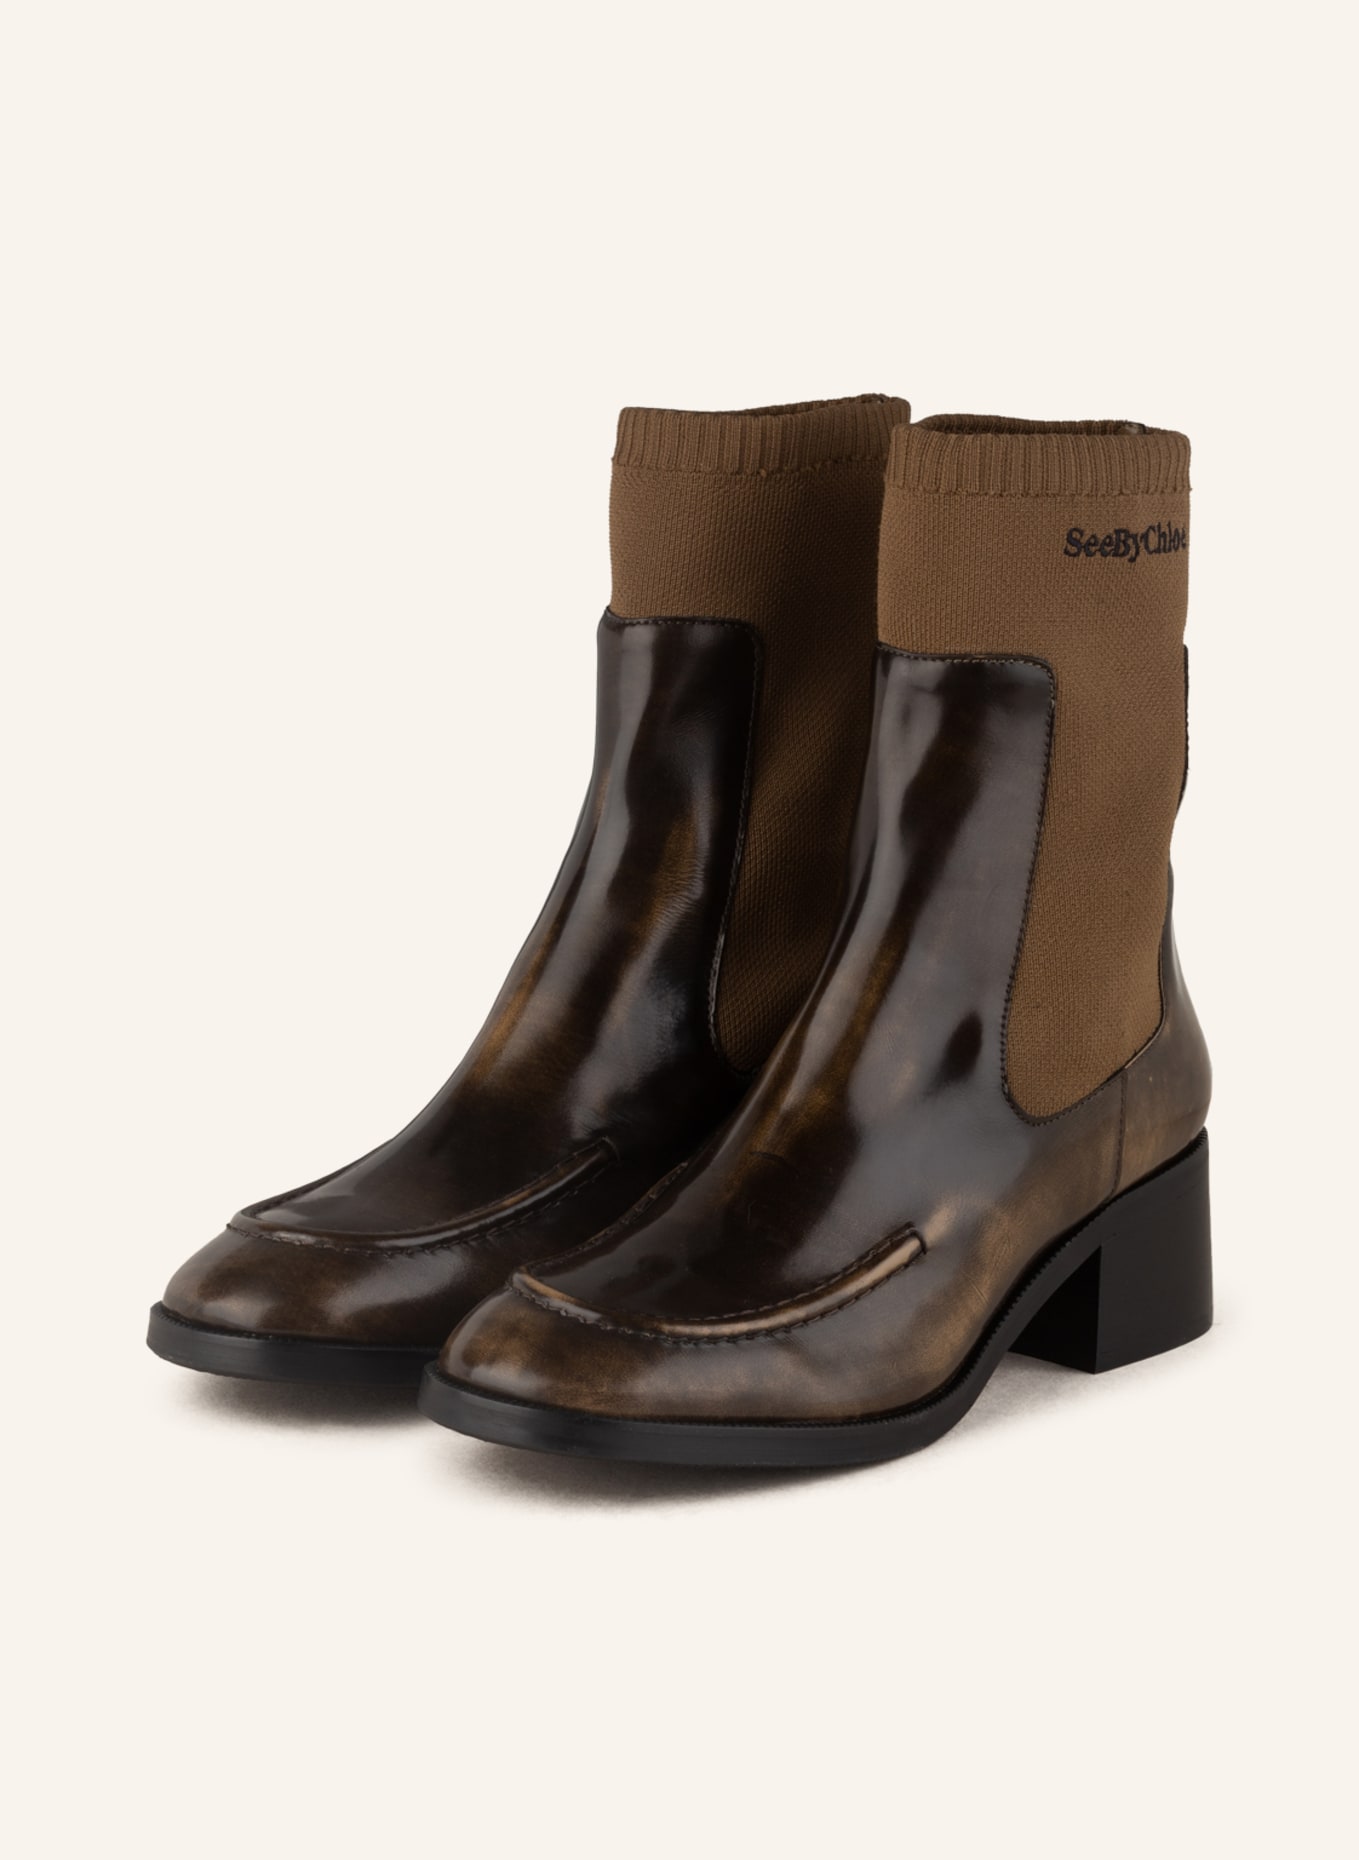 SEE BY CHLOÉ Chelsea-Boots WENDY, Barva: 110/415 Olive (Obrázek 1)